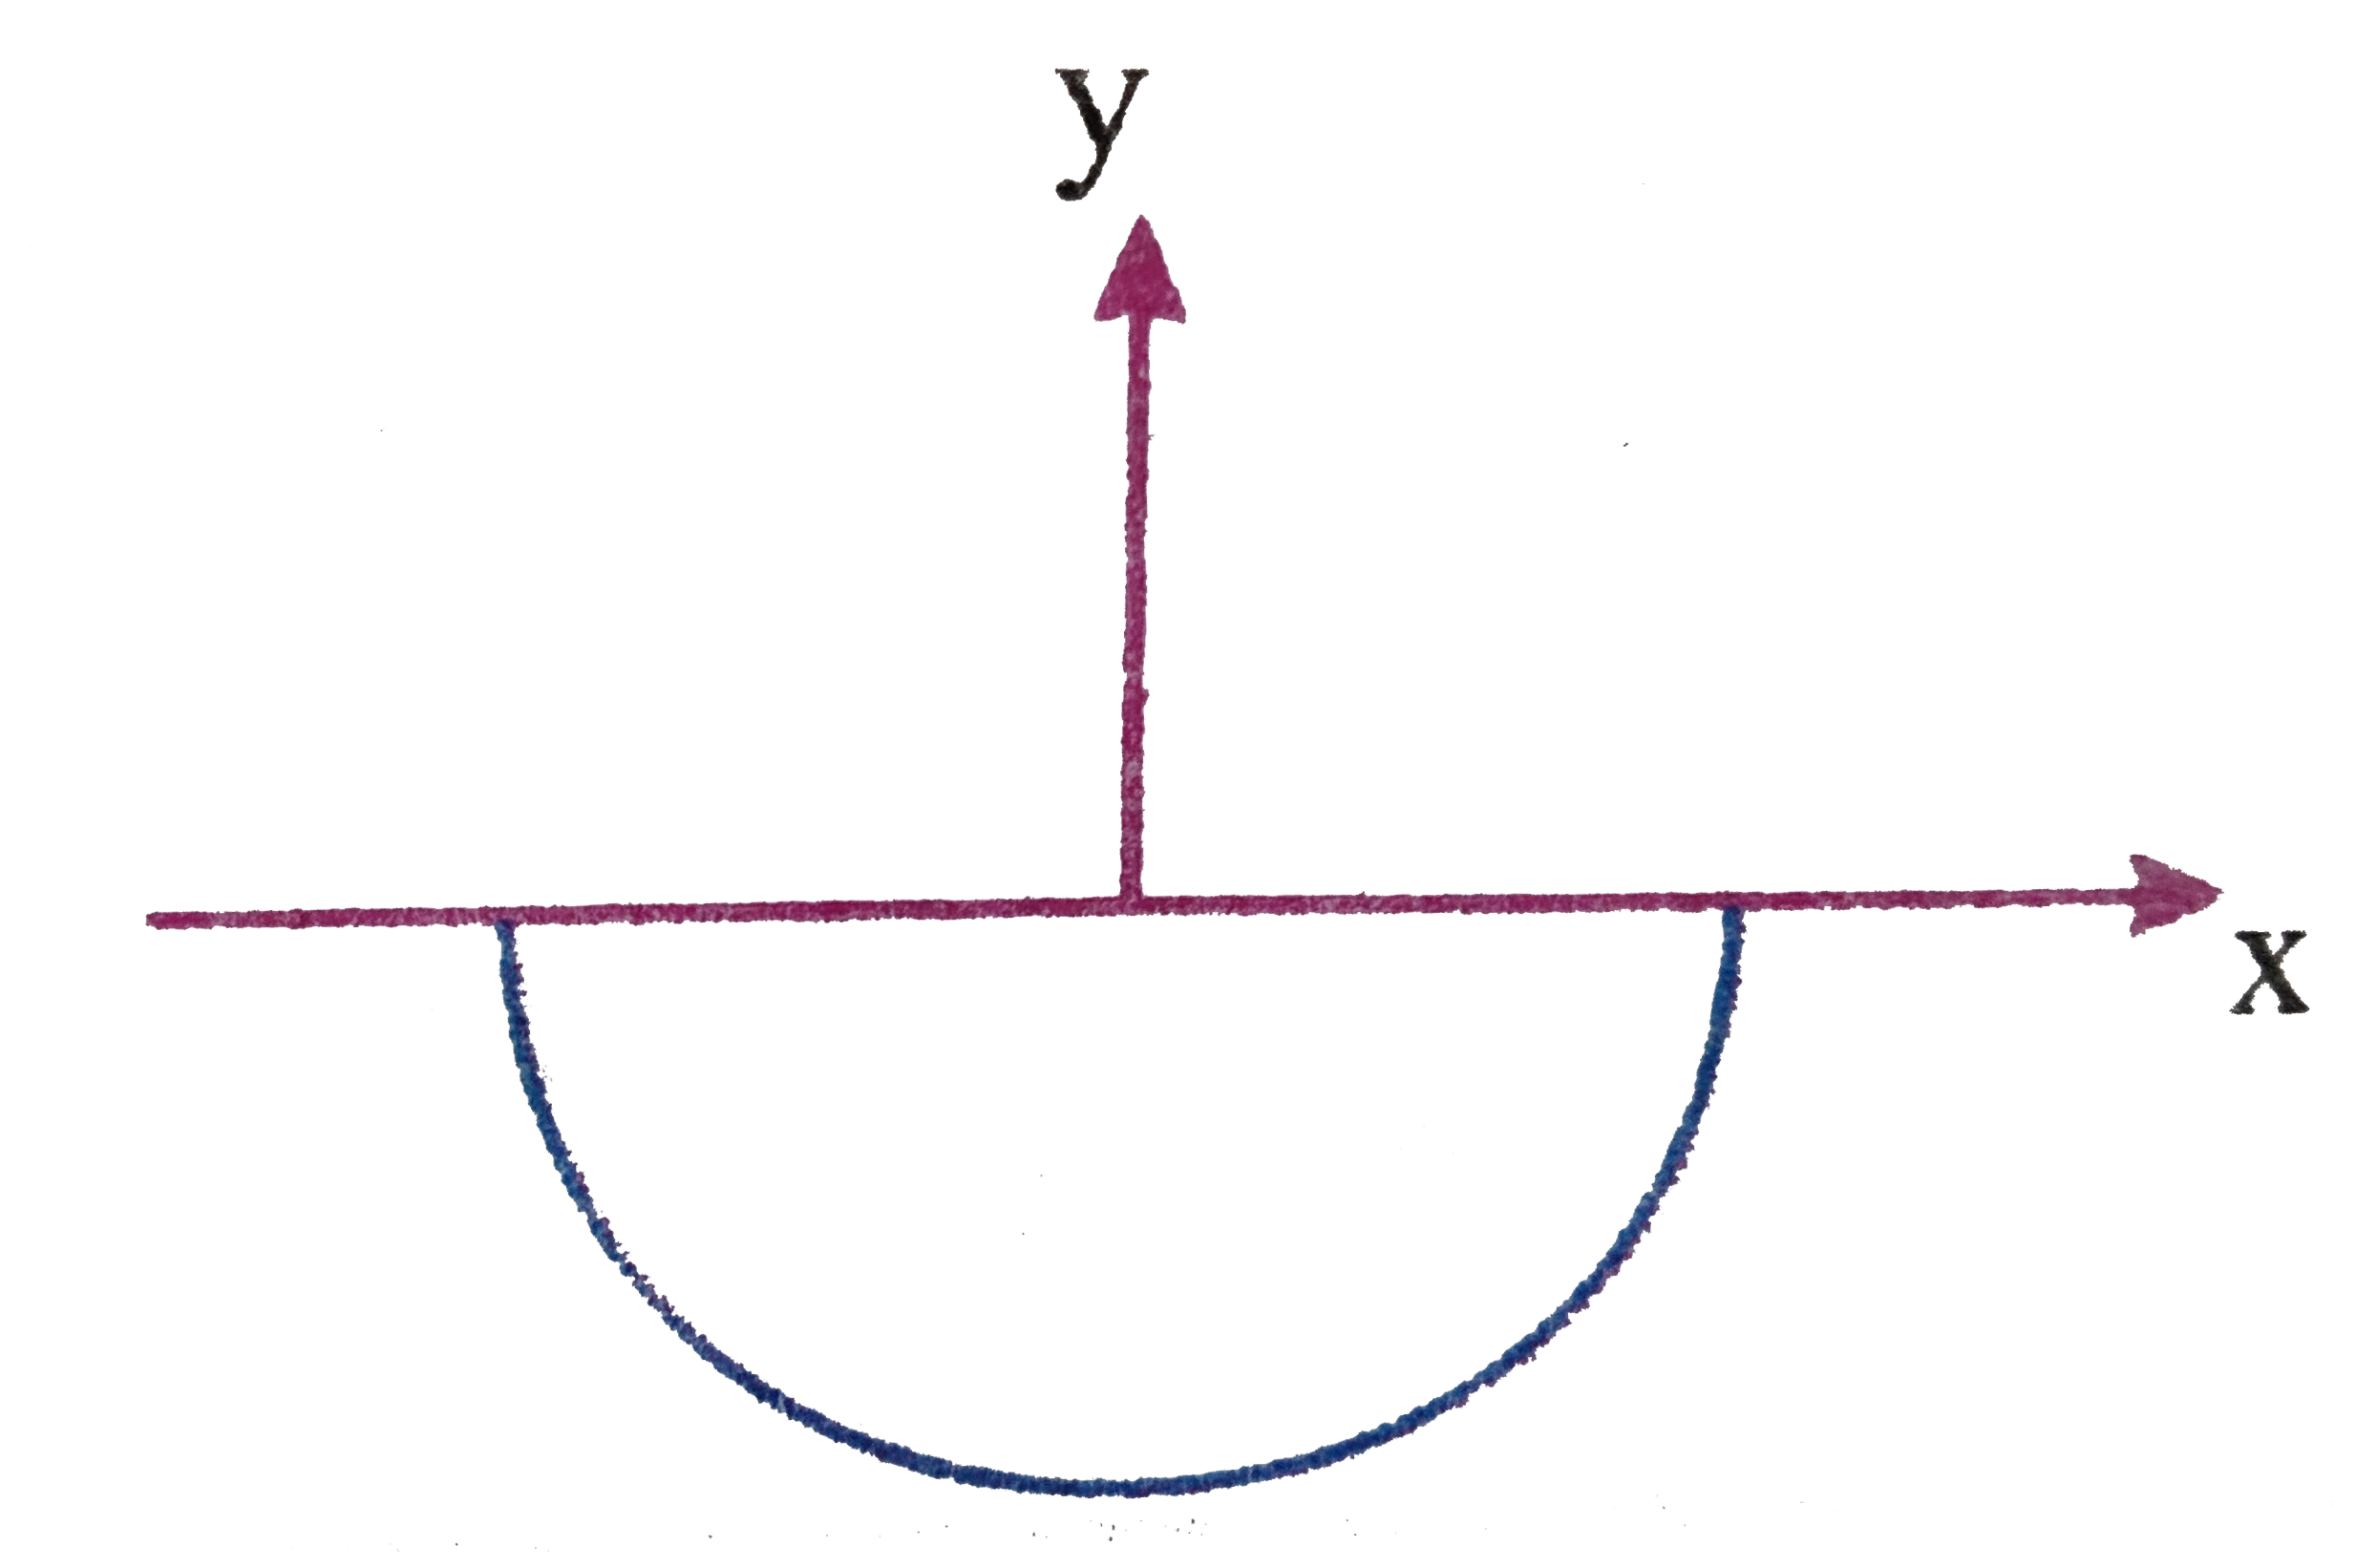 A seimicircular uniform wore of radius R = pi can rotate frelly about x-axis. The cnetre of curvature is at origin as shown. The acceleration due to gravity is given by vec(g)=-x^(2)hatj units. For small oscillations of the wire its time period is given by pisqrt(x). the value of x is